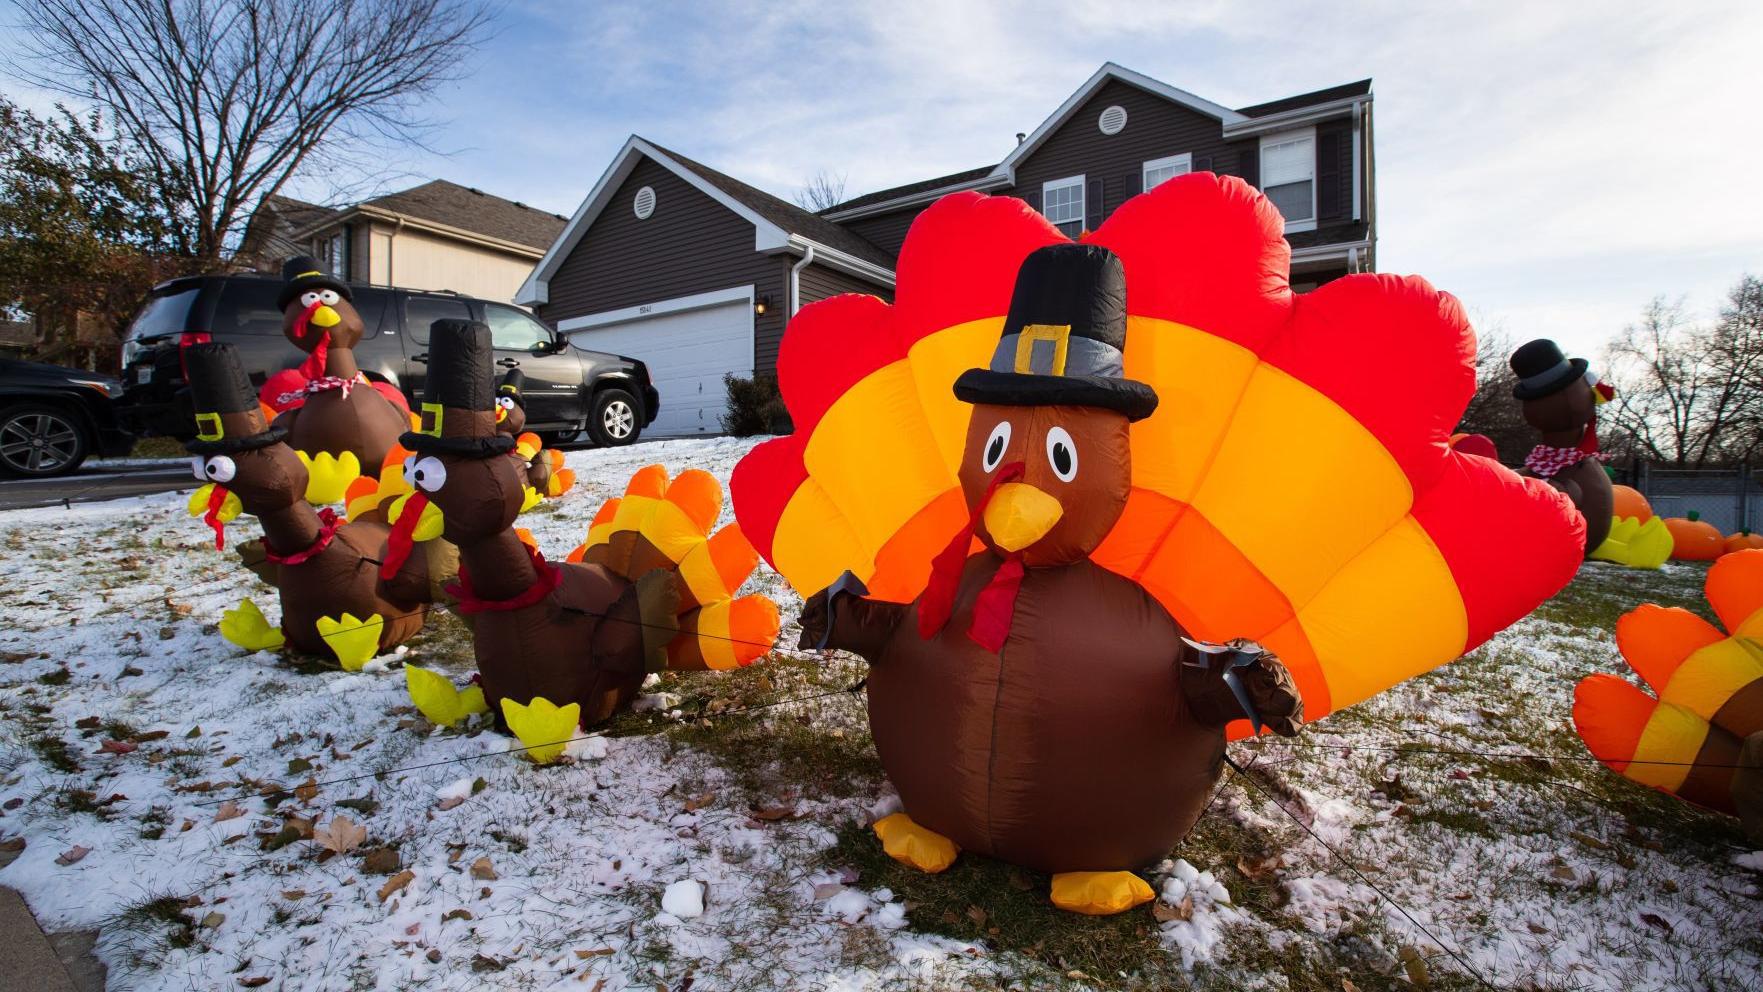 Inflatable Turkey War Is Out Of Control For Omaha Neighbors Inspired Living Omaha Com